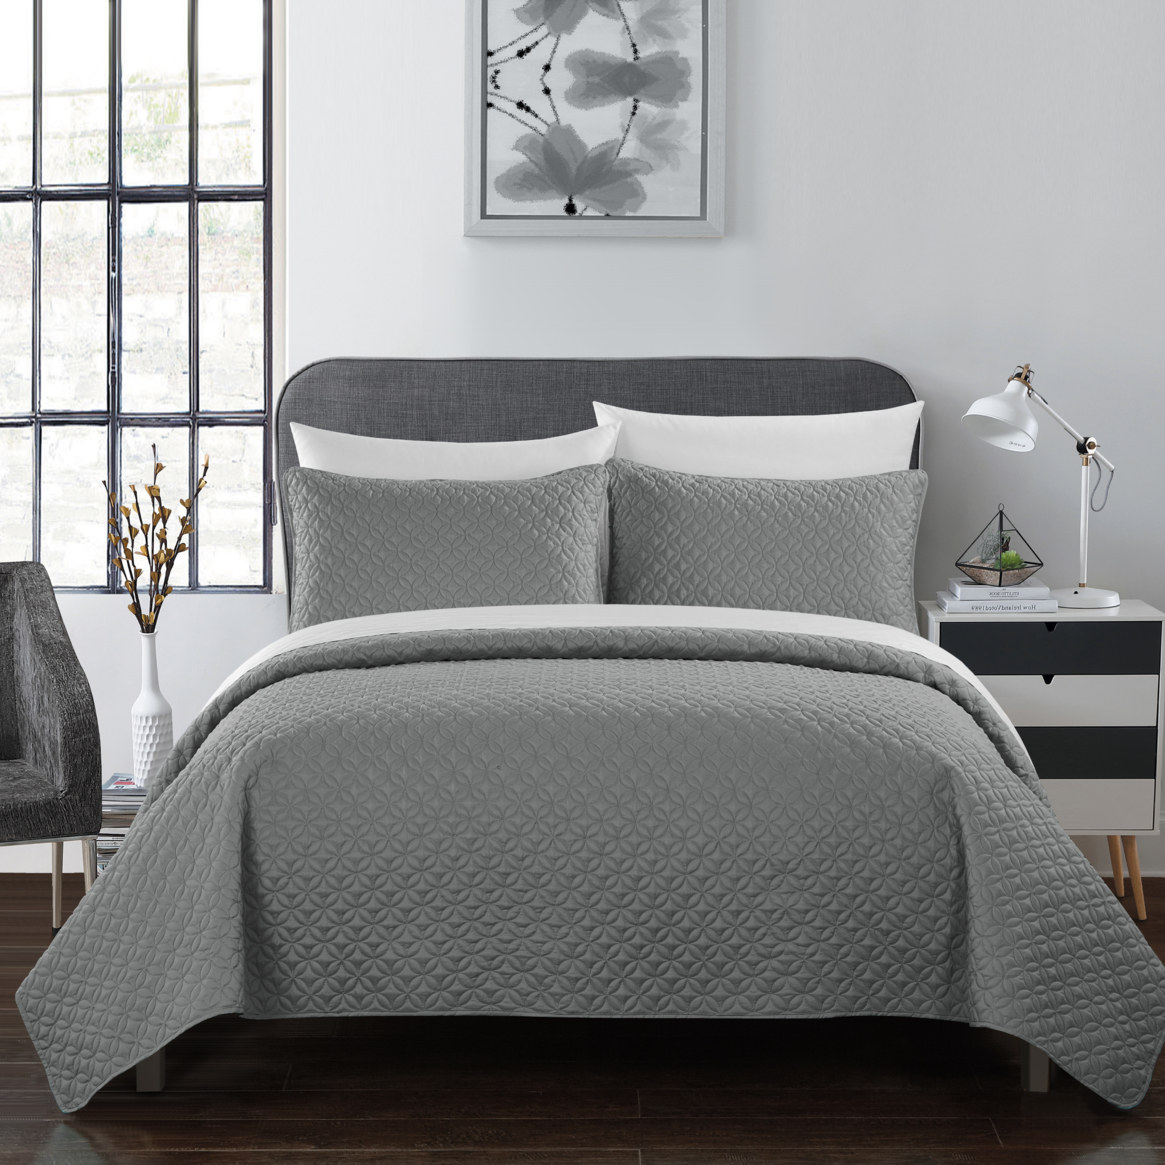 Gideon 7 Or 5 Piece Quilt Cover Set Rose Star Geometric Quilted Bed In A Bag - Sheet Set Decorative Pillow Shams Included - Grey, Twin X-lon